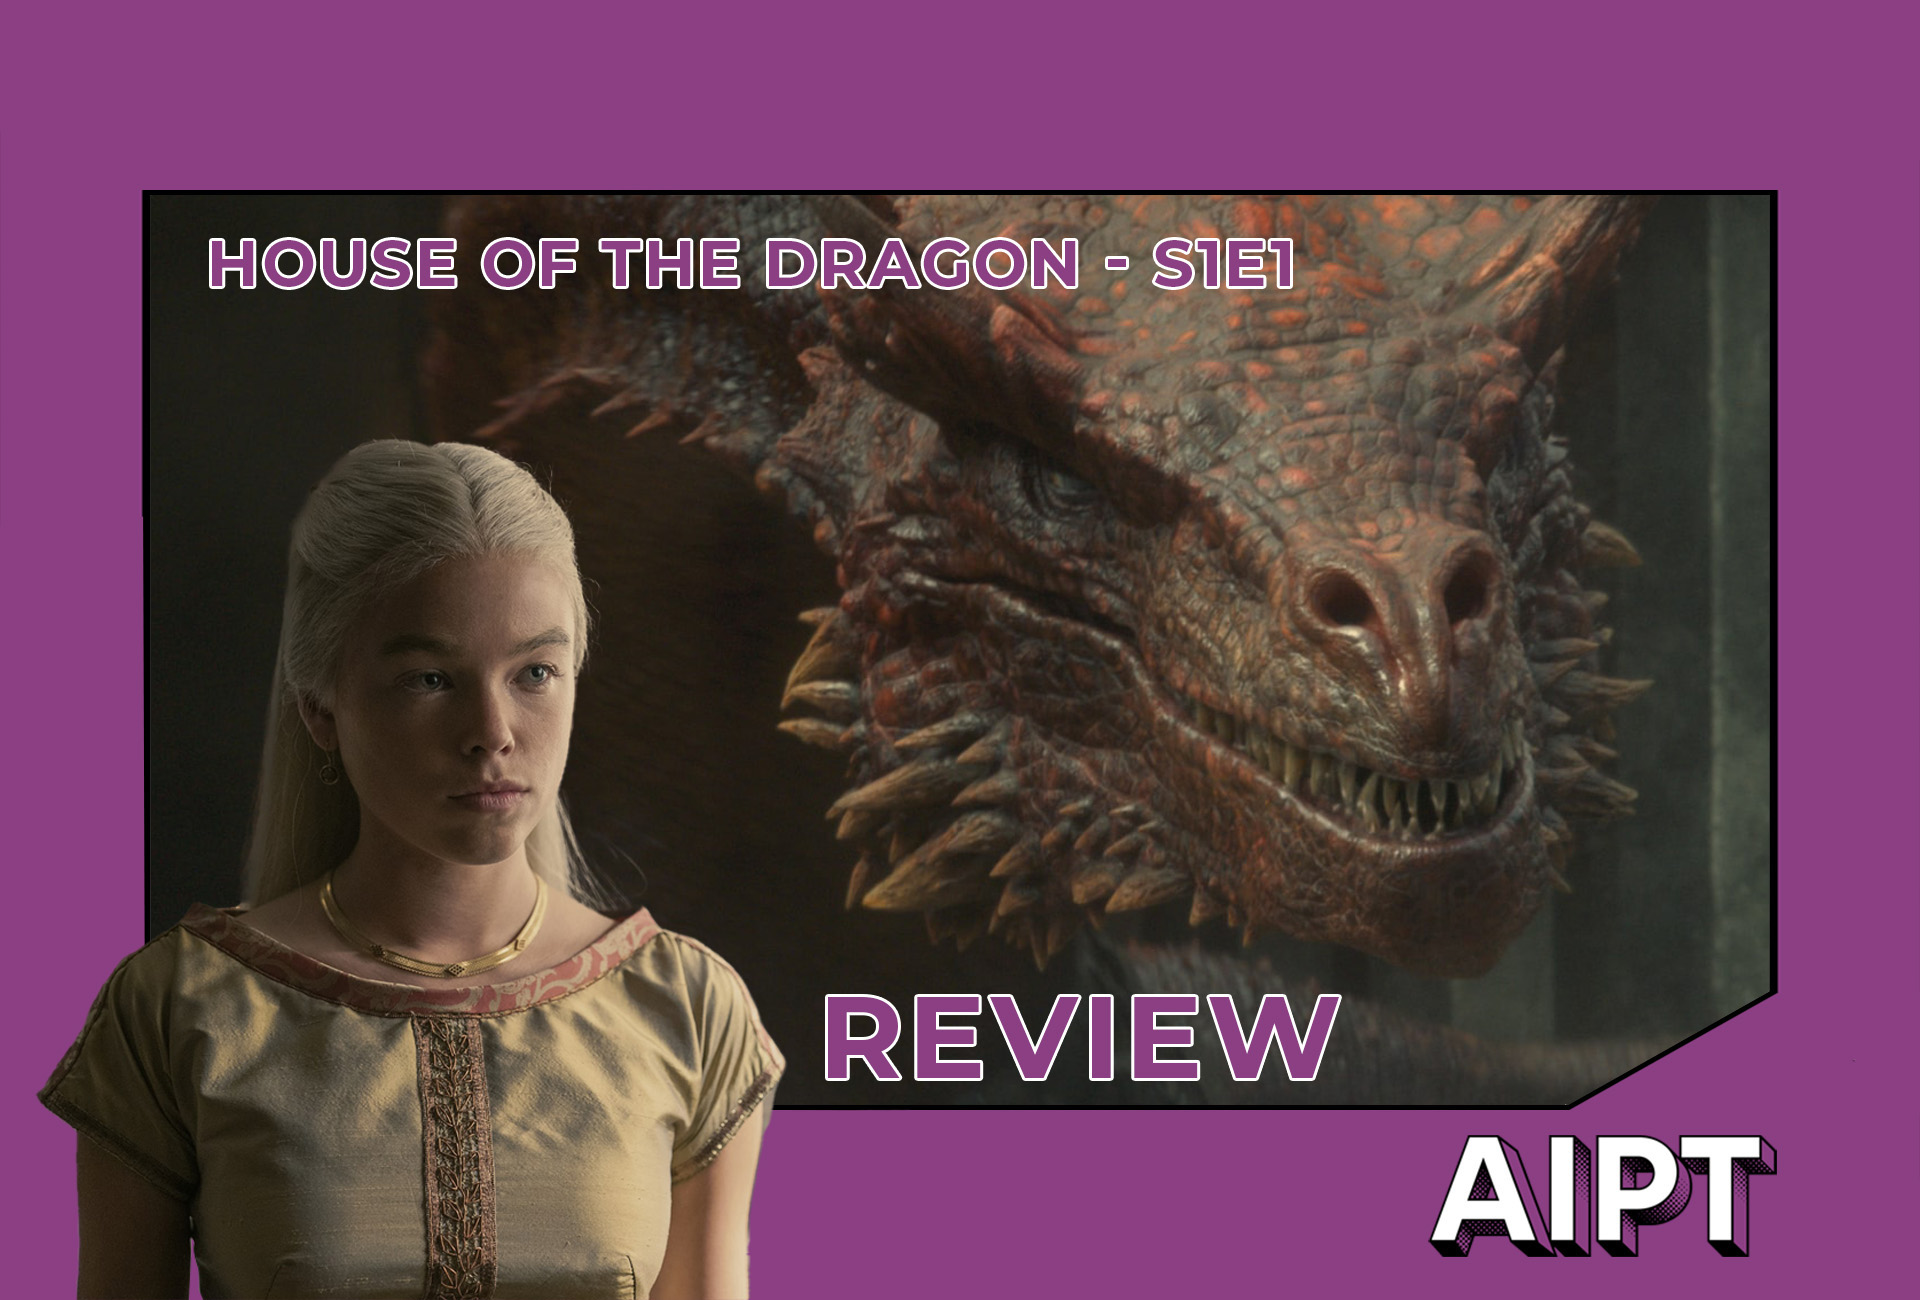 'House of the Dragon' S1E1 'The Heirs of the Dragon' review